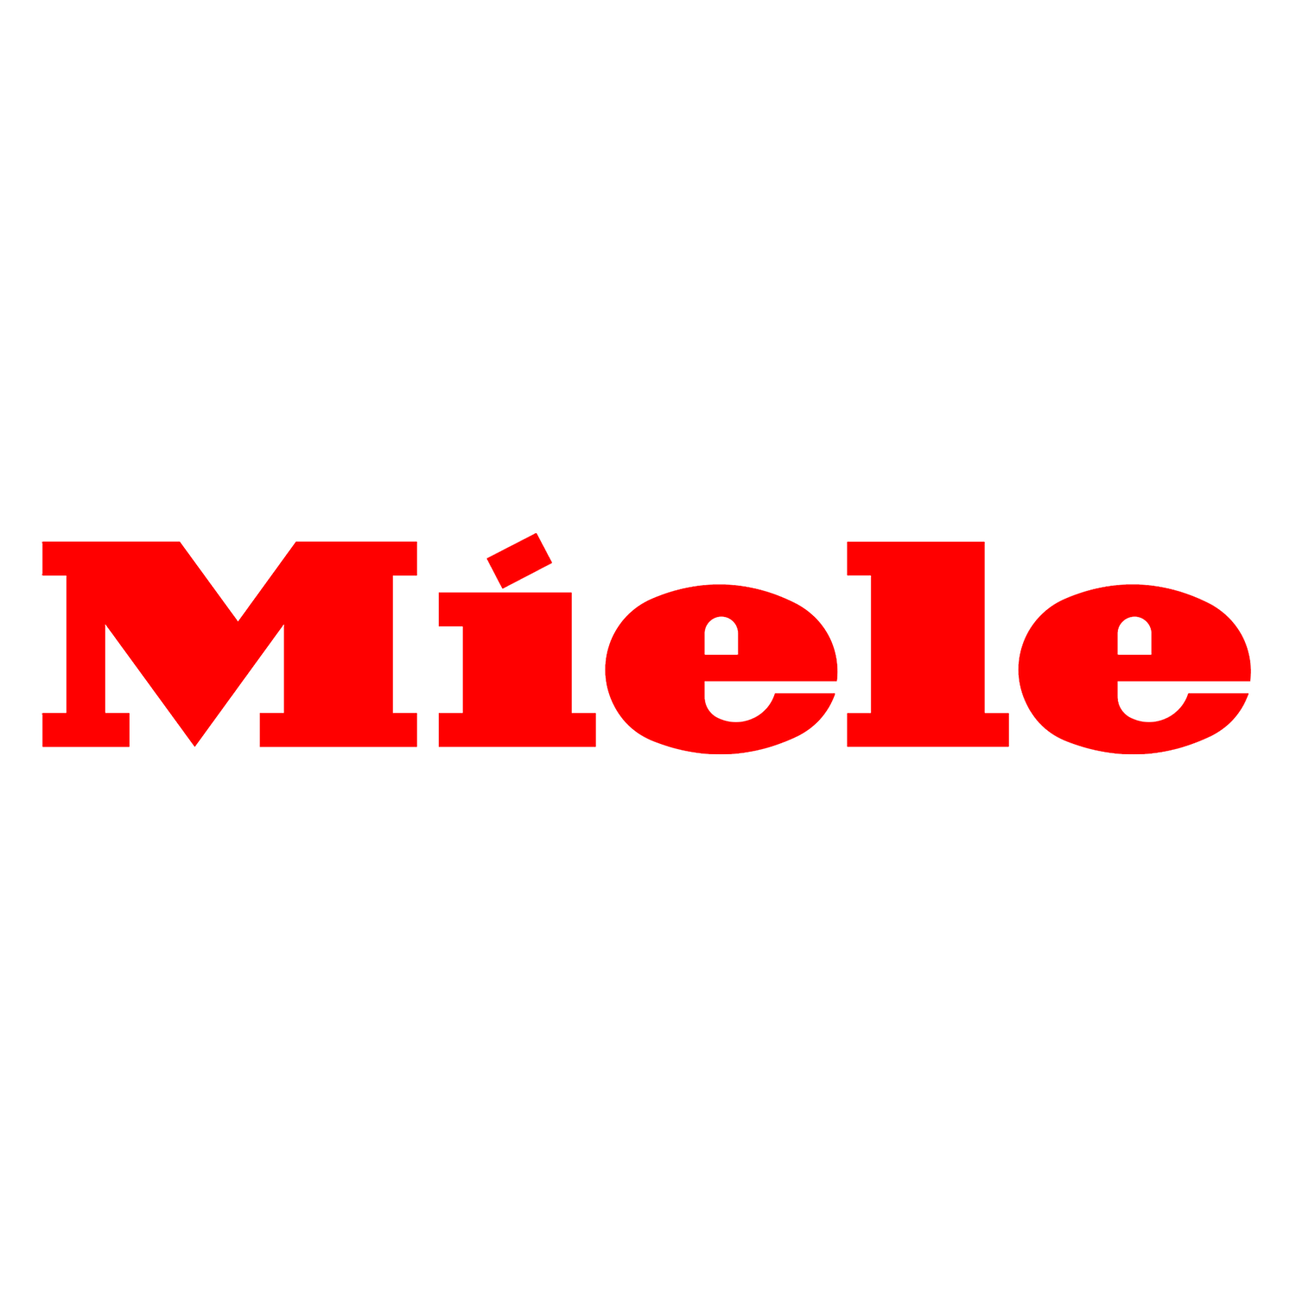 Miele Cooktop & Oven Parts - My Oven Spares